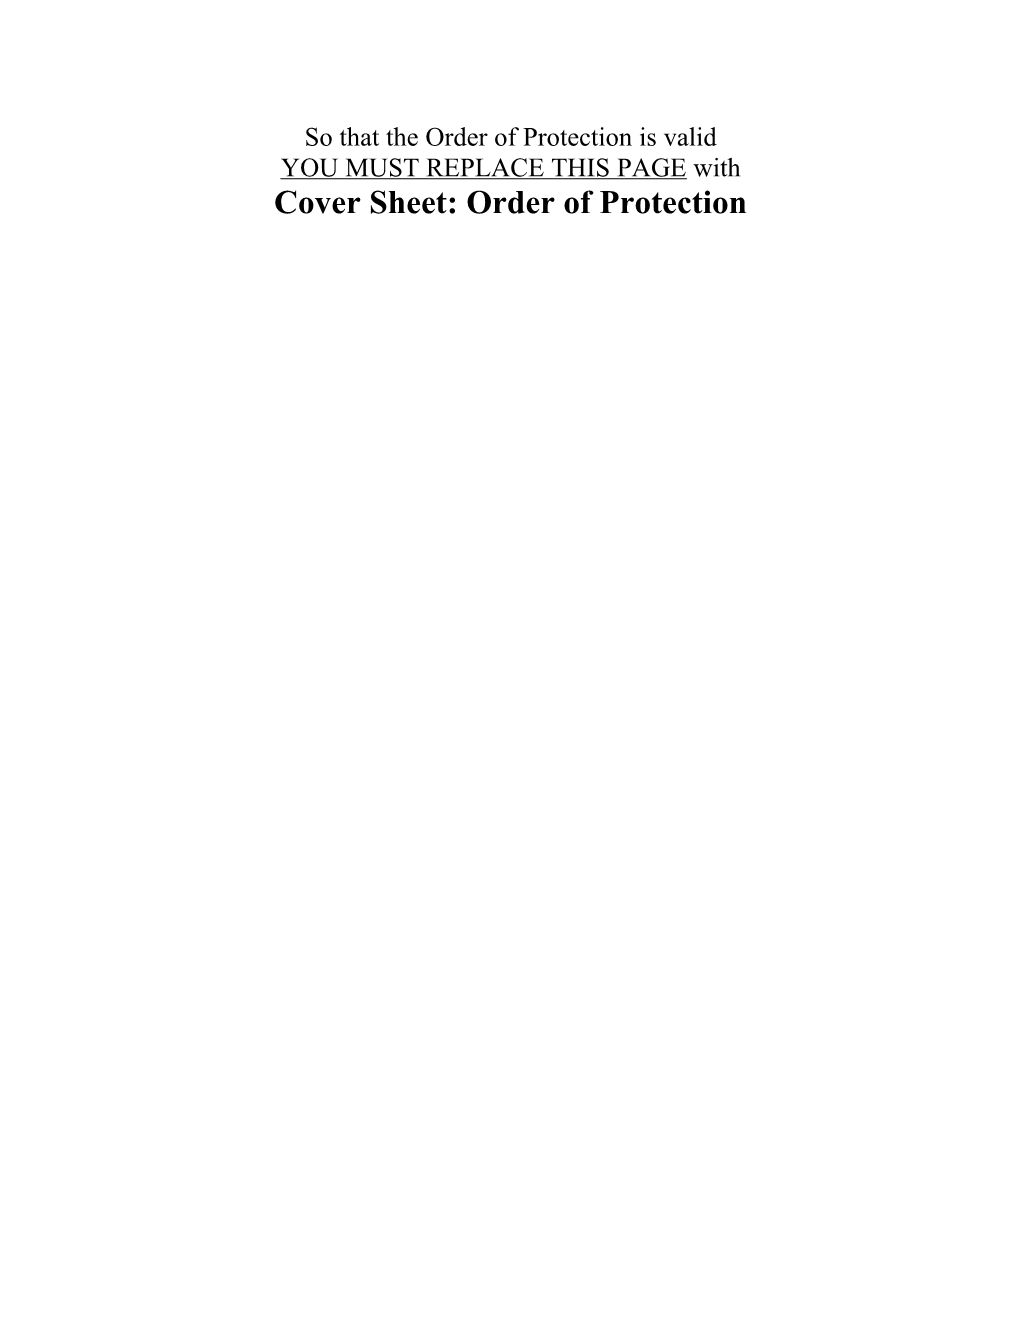 Cover Sheet: Order of Protection s1